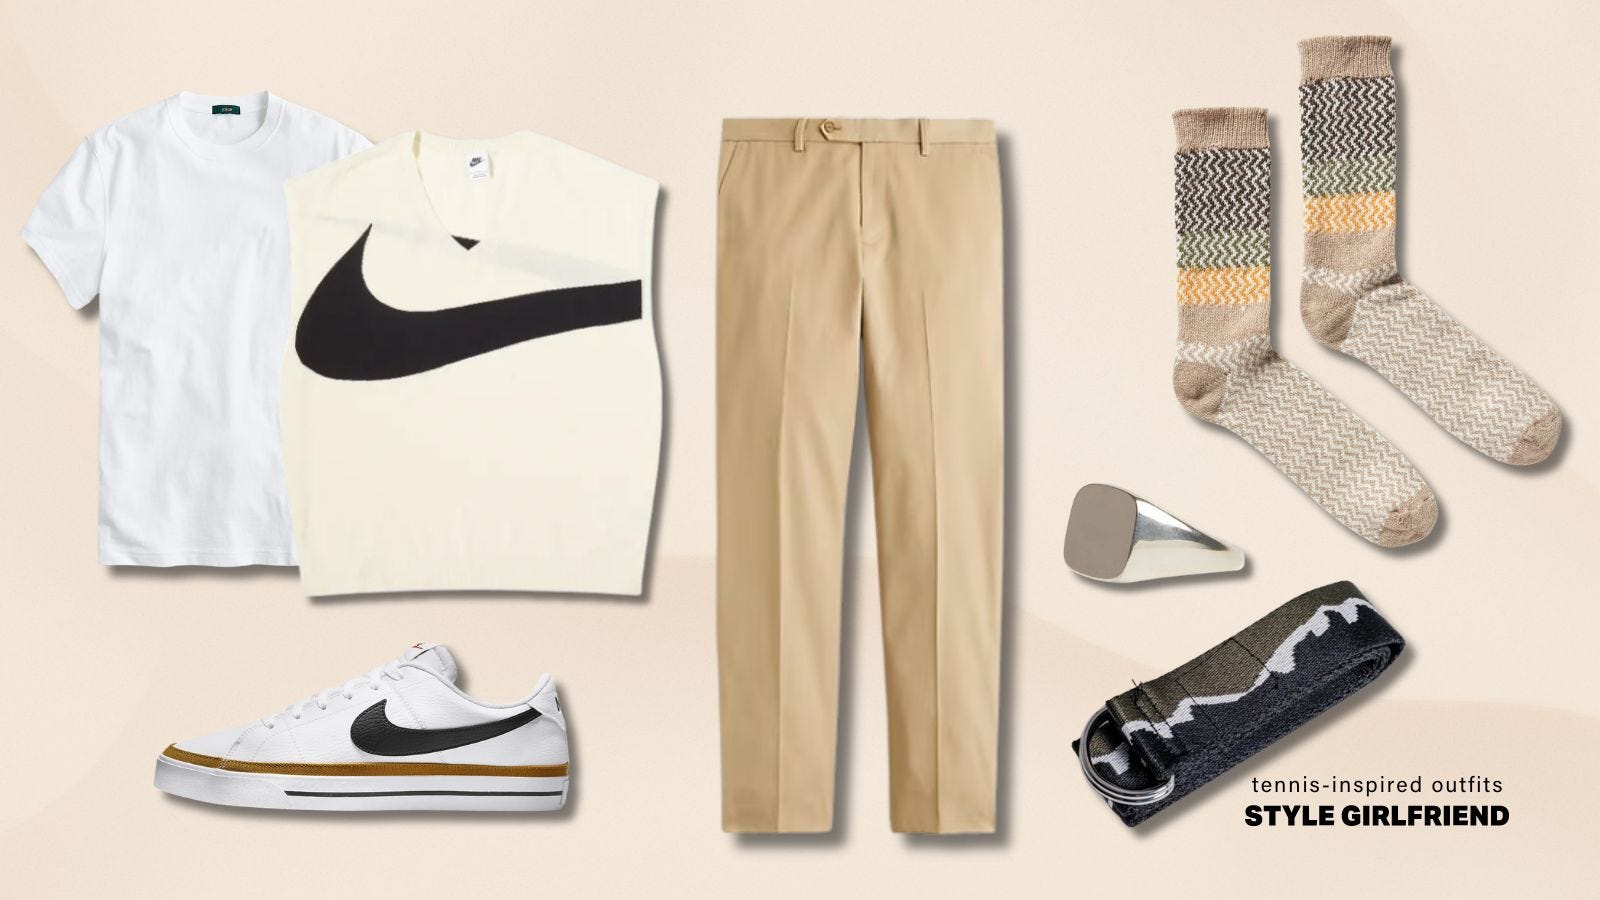 flat lay image of casual, tennis-inspired men's outfit including a cream-colored sweater vest, white t-shirt, tan trousers, socks, a signet ring, and white tennis shoes